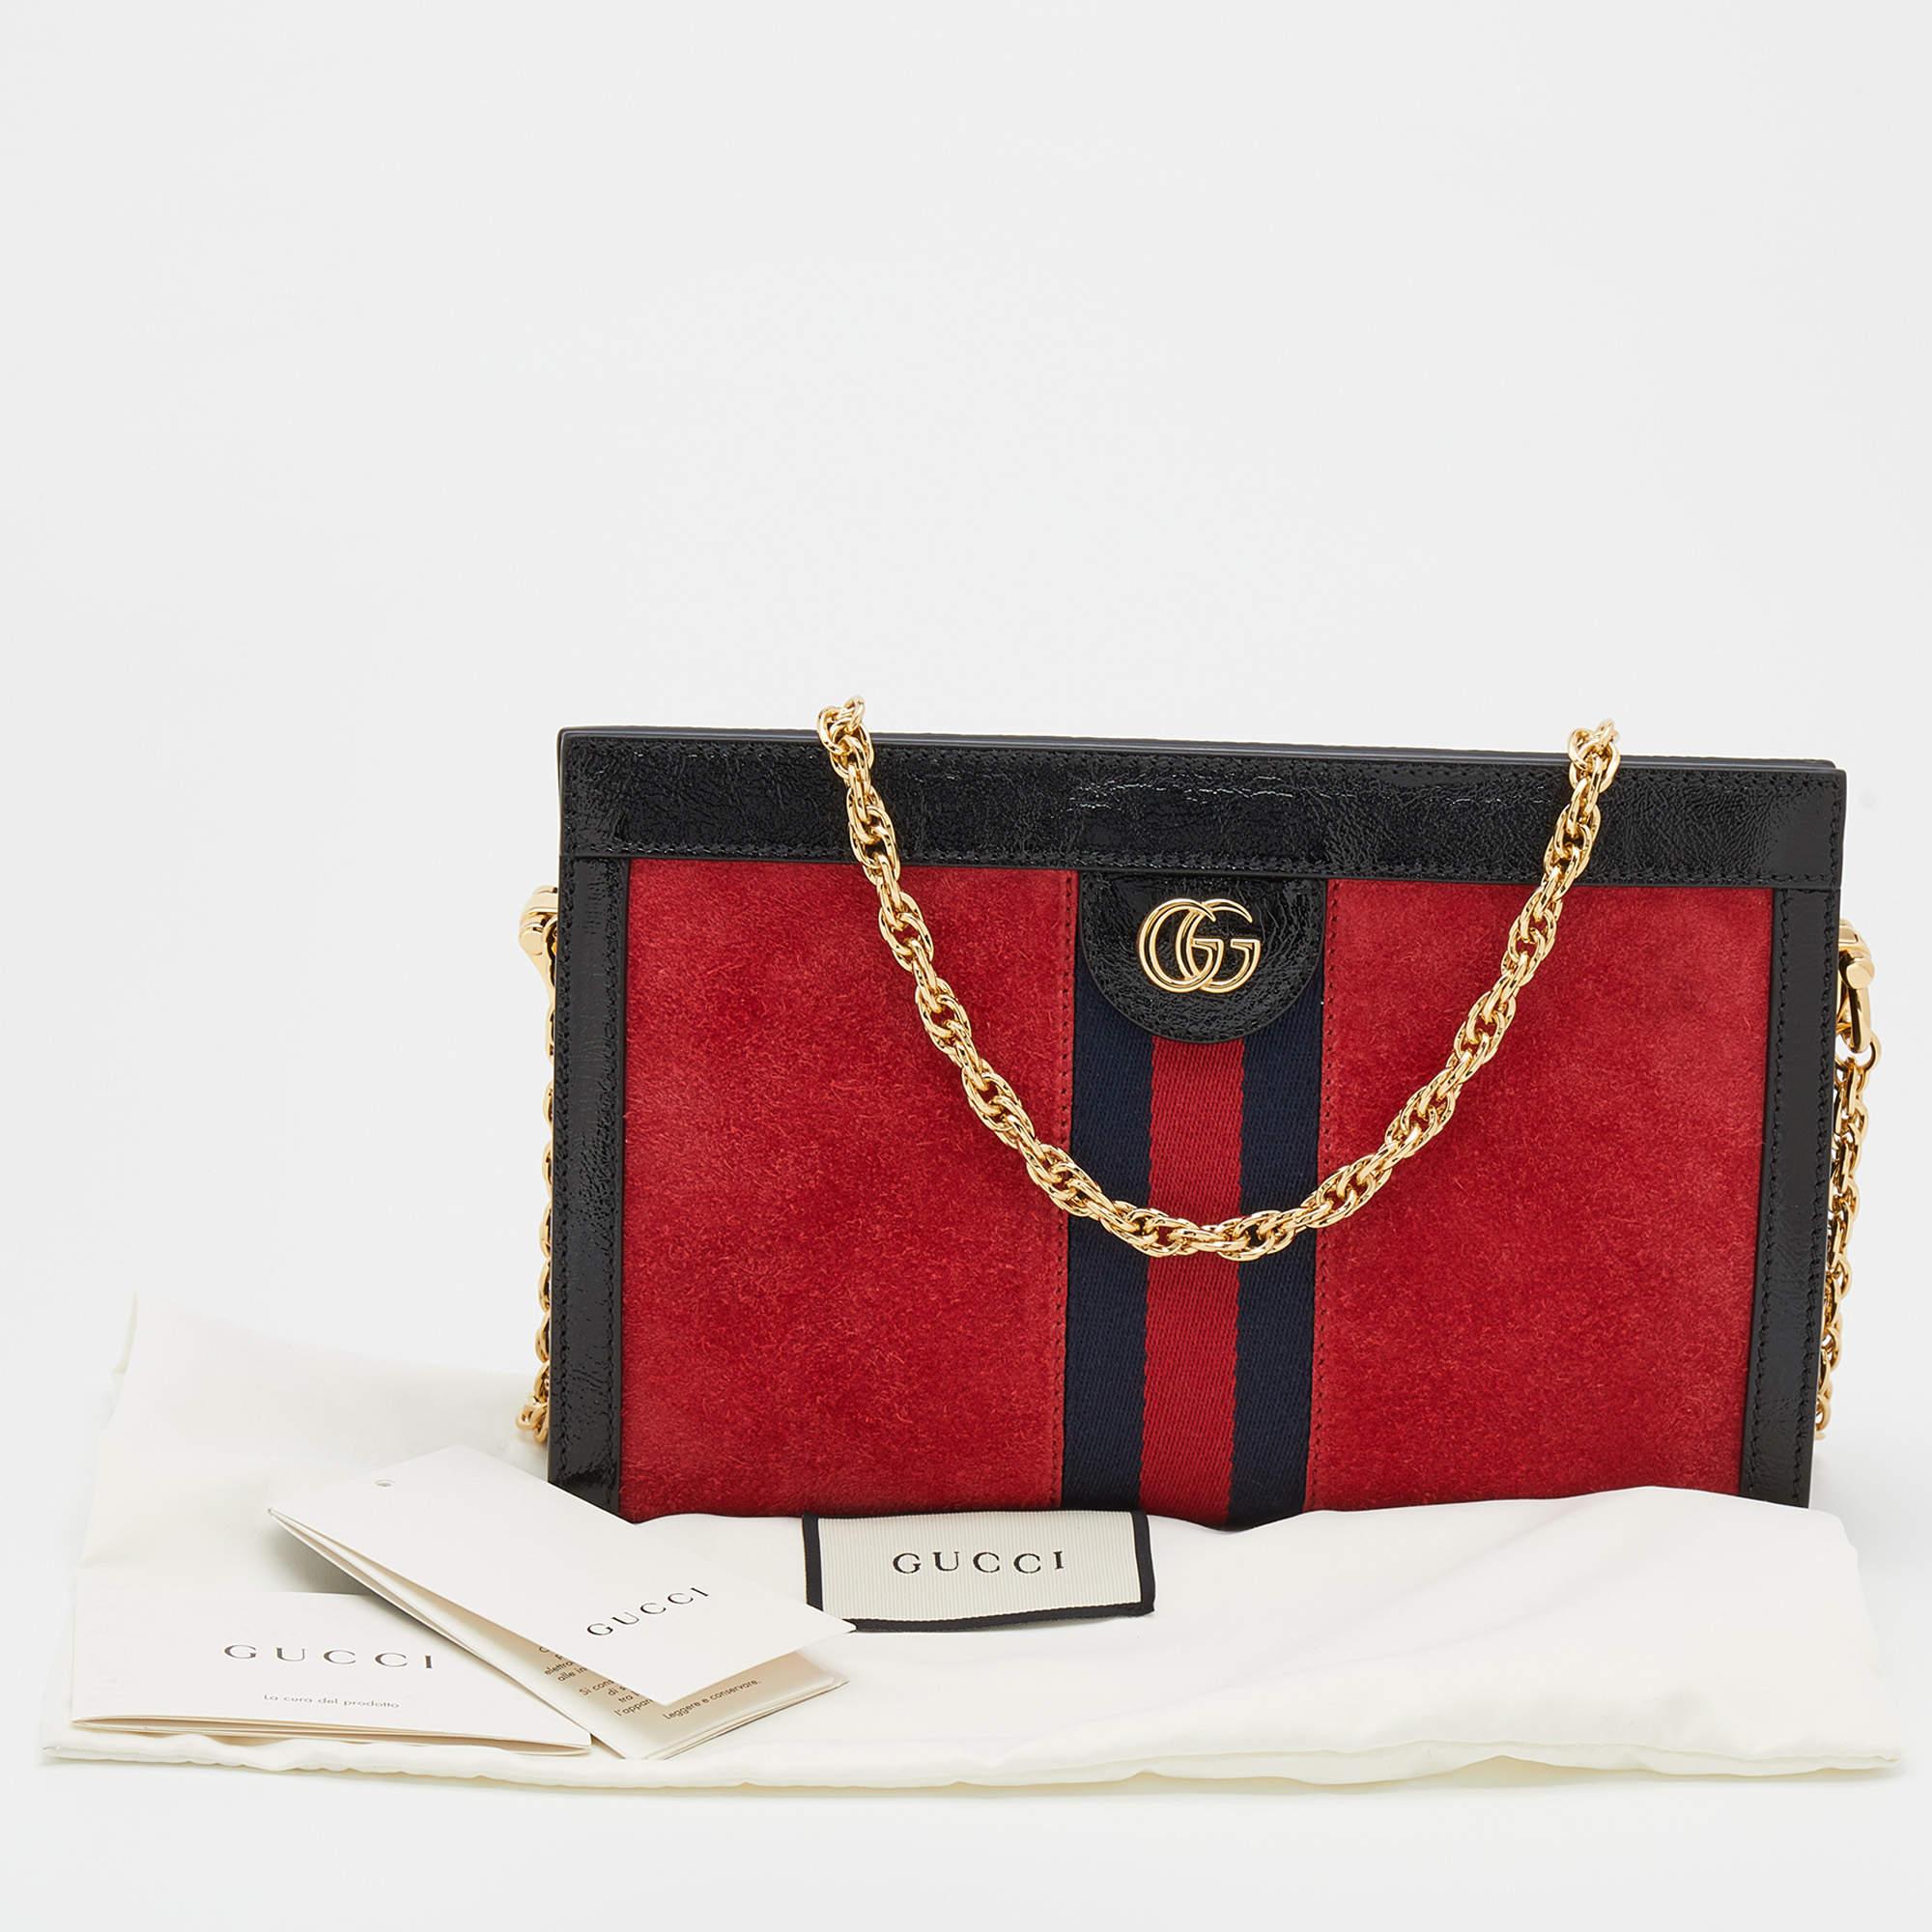 Gucci Red/Black Suede and Patent Leather Small Ophidia Shoulder Bag 5